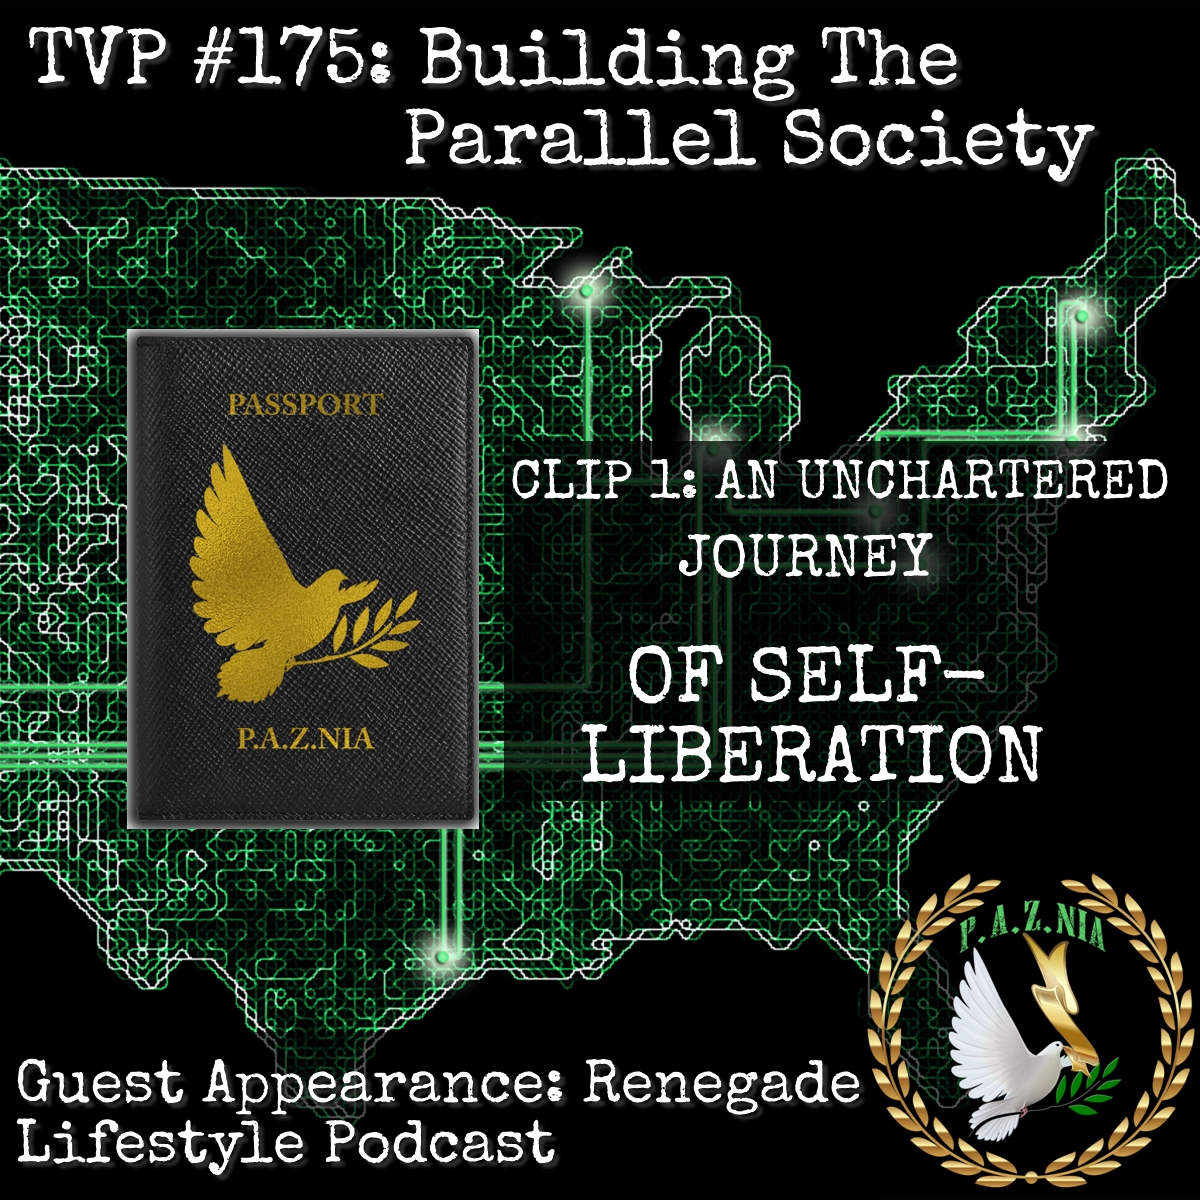 An Uncharted Journey of Self-Liberation: My Path to #TheFreeRepublic of P.A.Z.NIA (TVP #175 Excerpt)